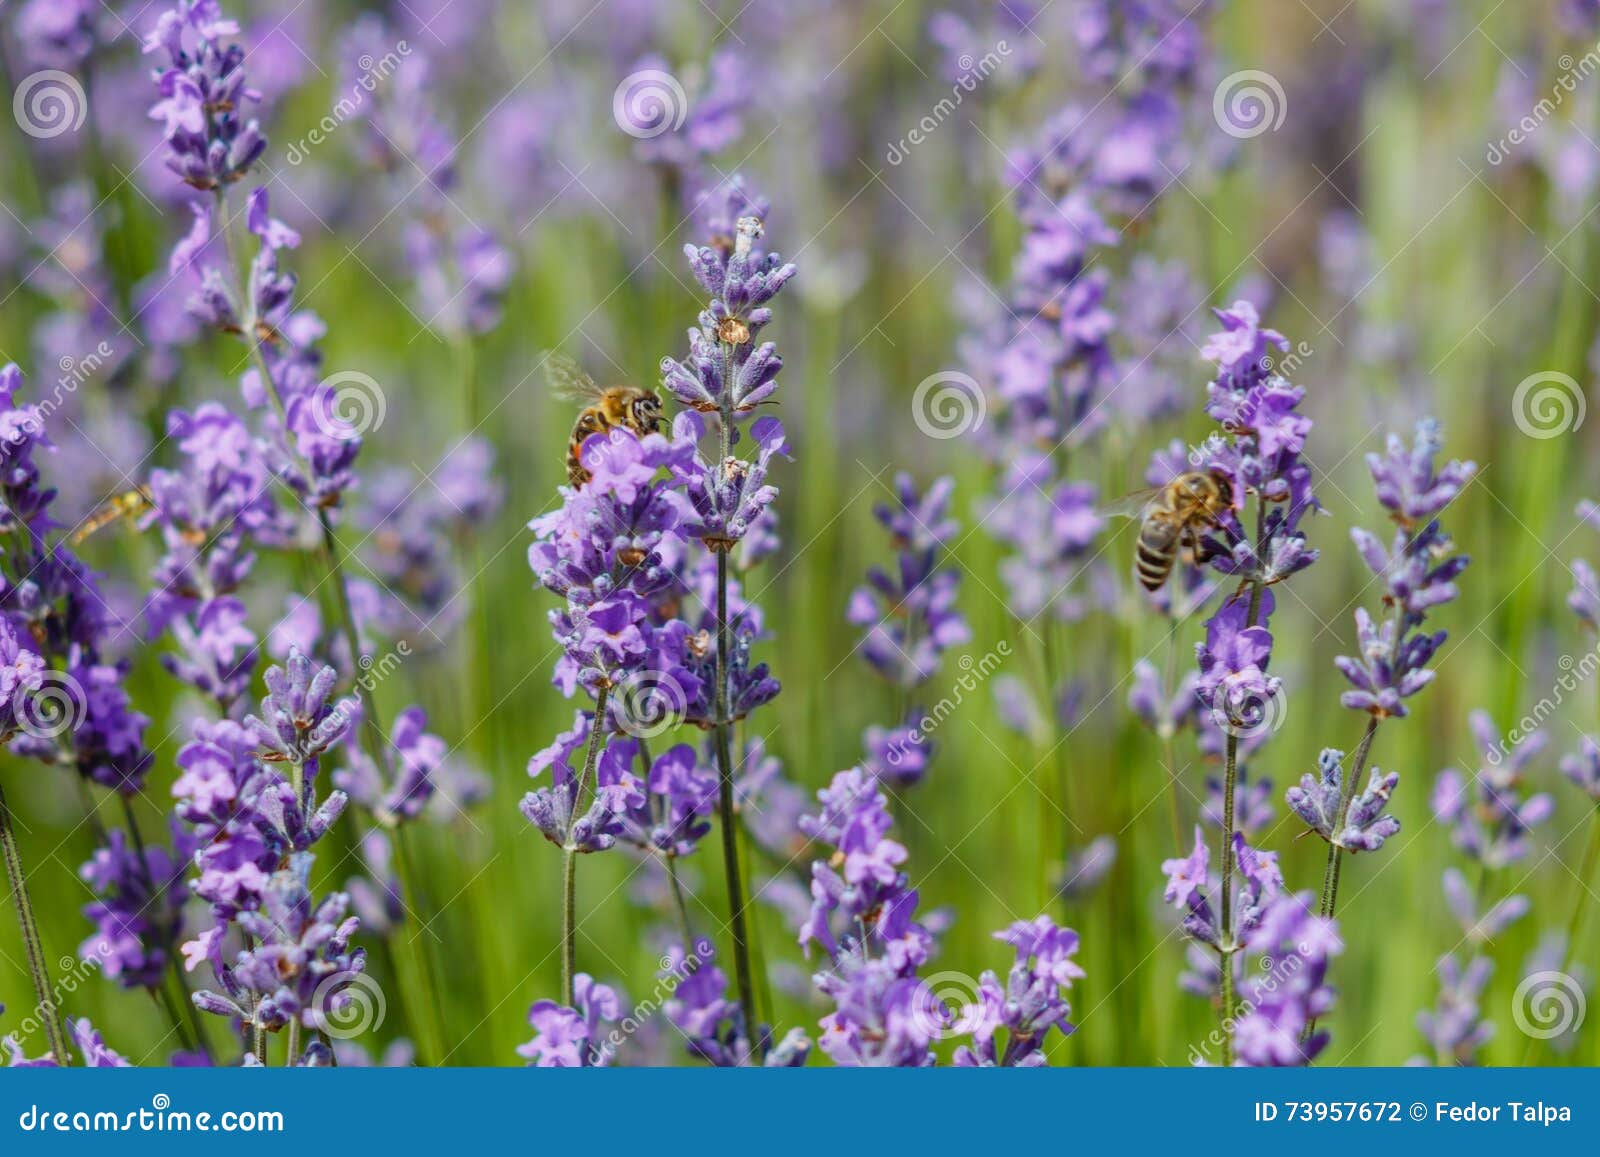 bees pollinate lavender